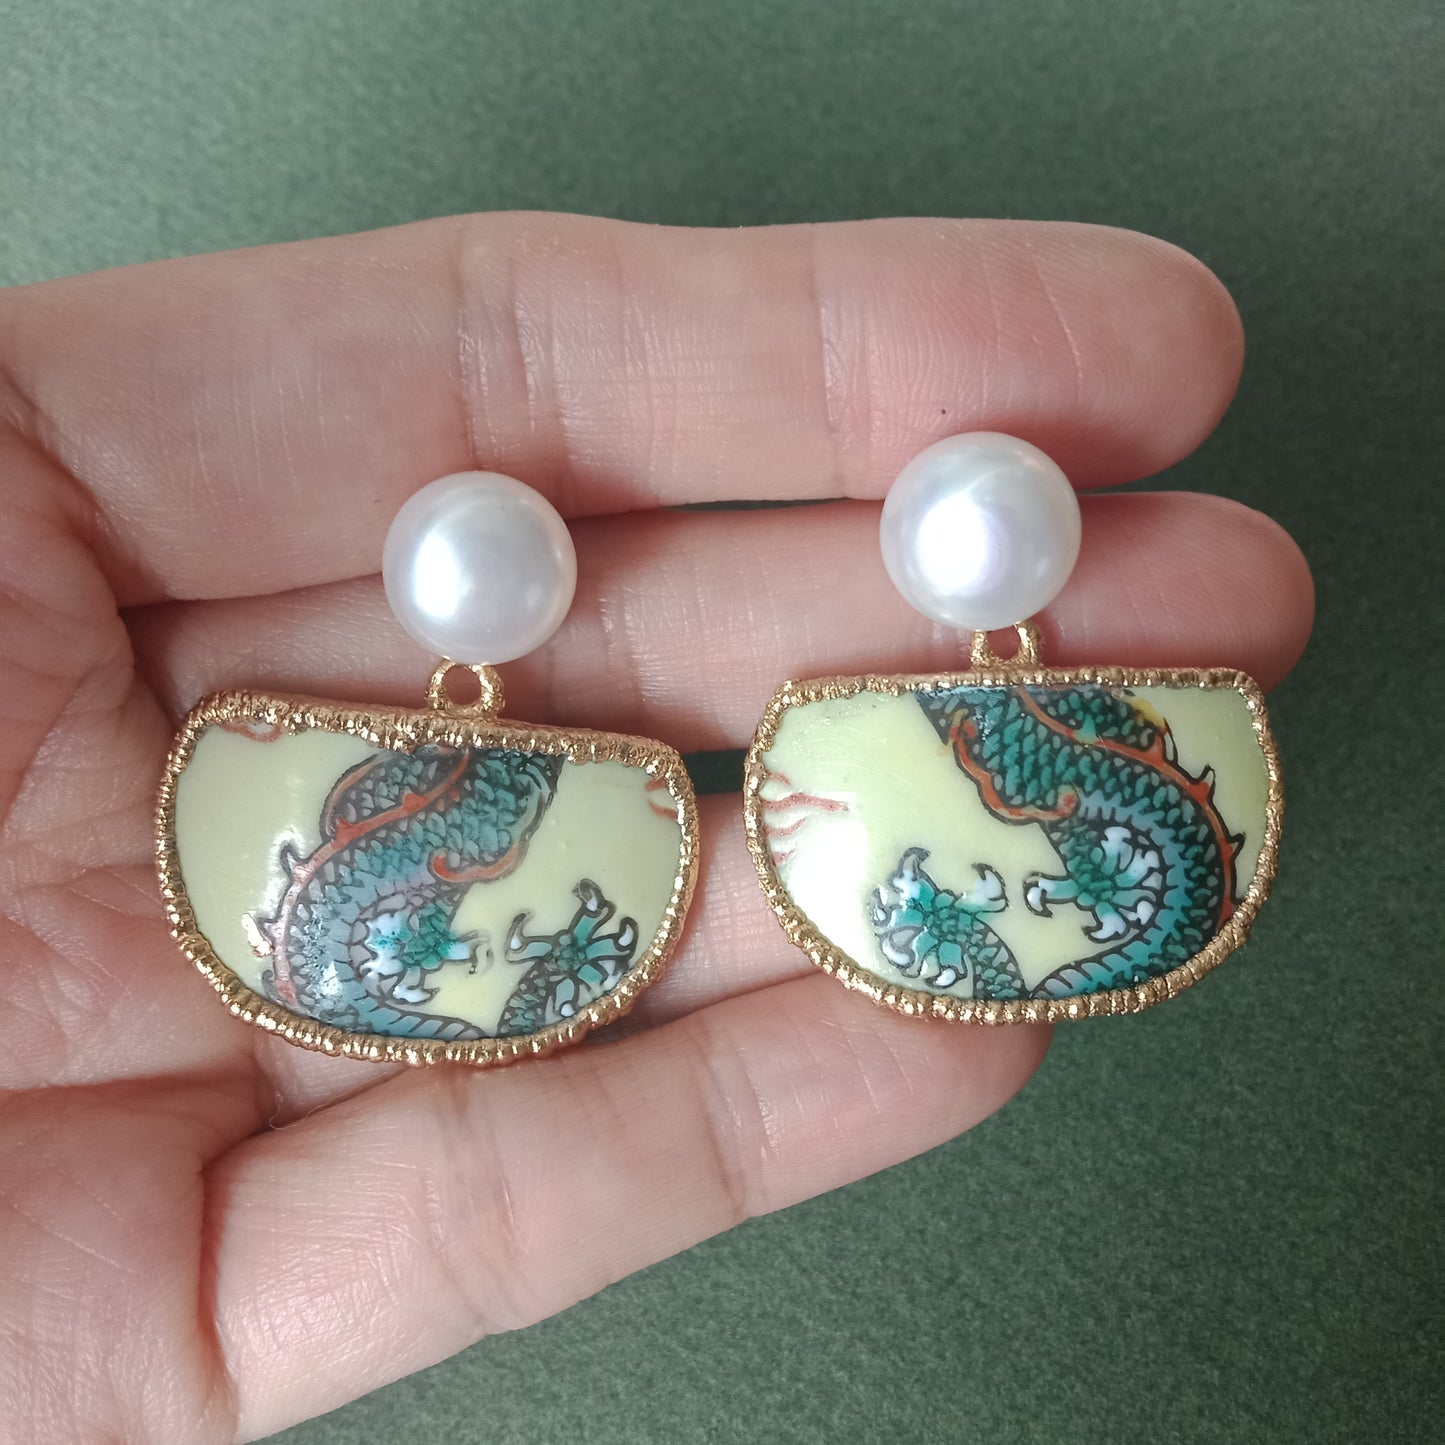 Five-clawed dragon porcelain and FW pearl earrings